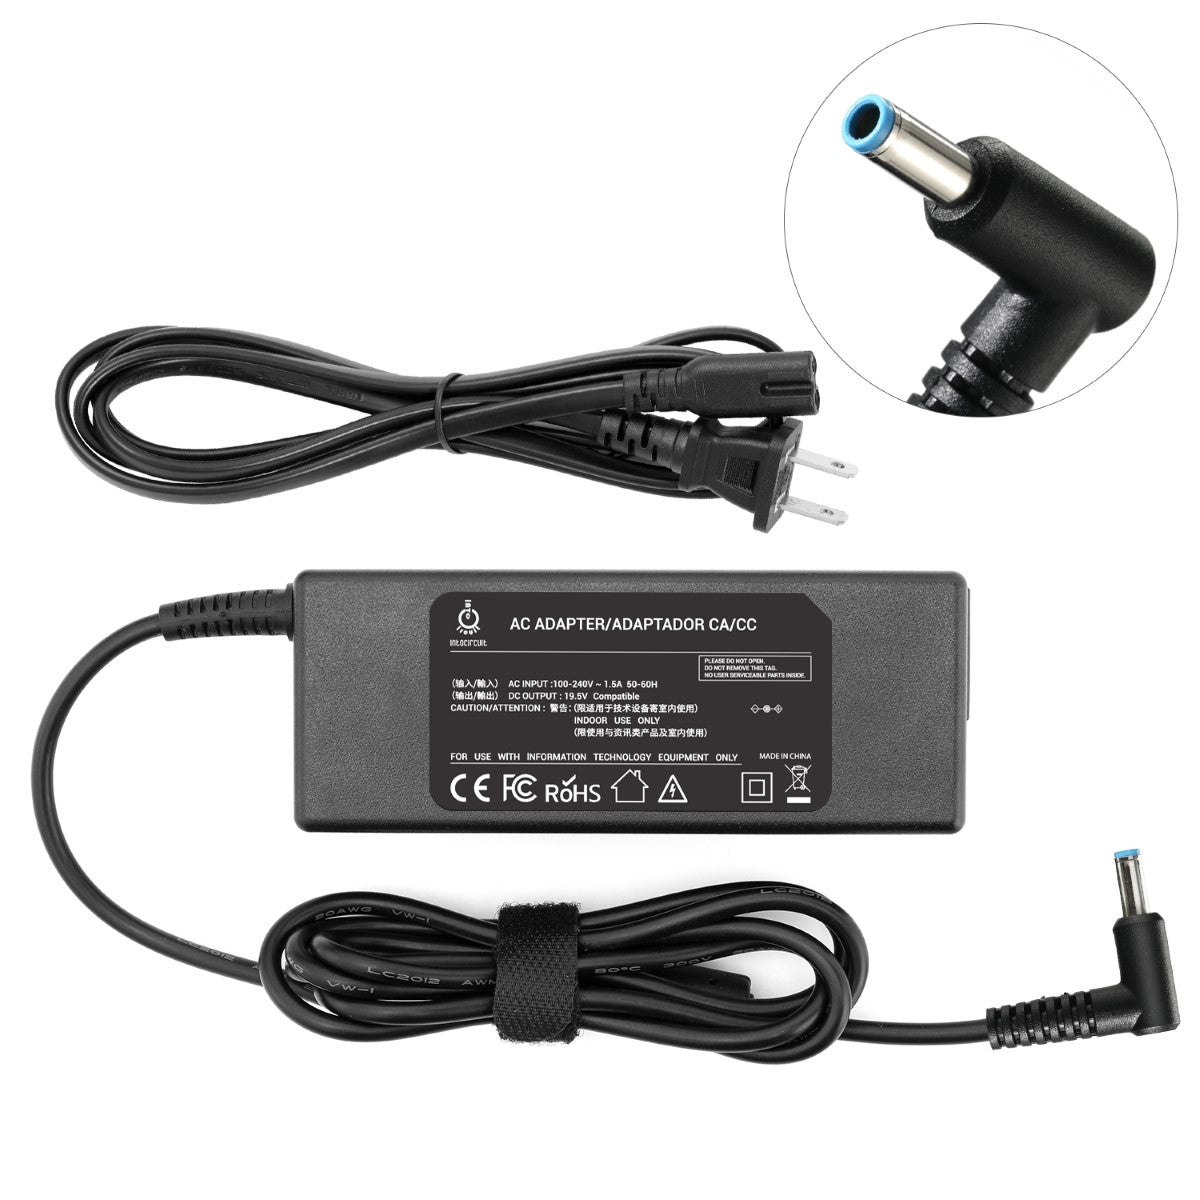 Charger for HP Spectre 13-4005dx Convertible Laptop